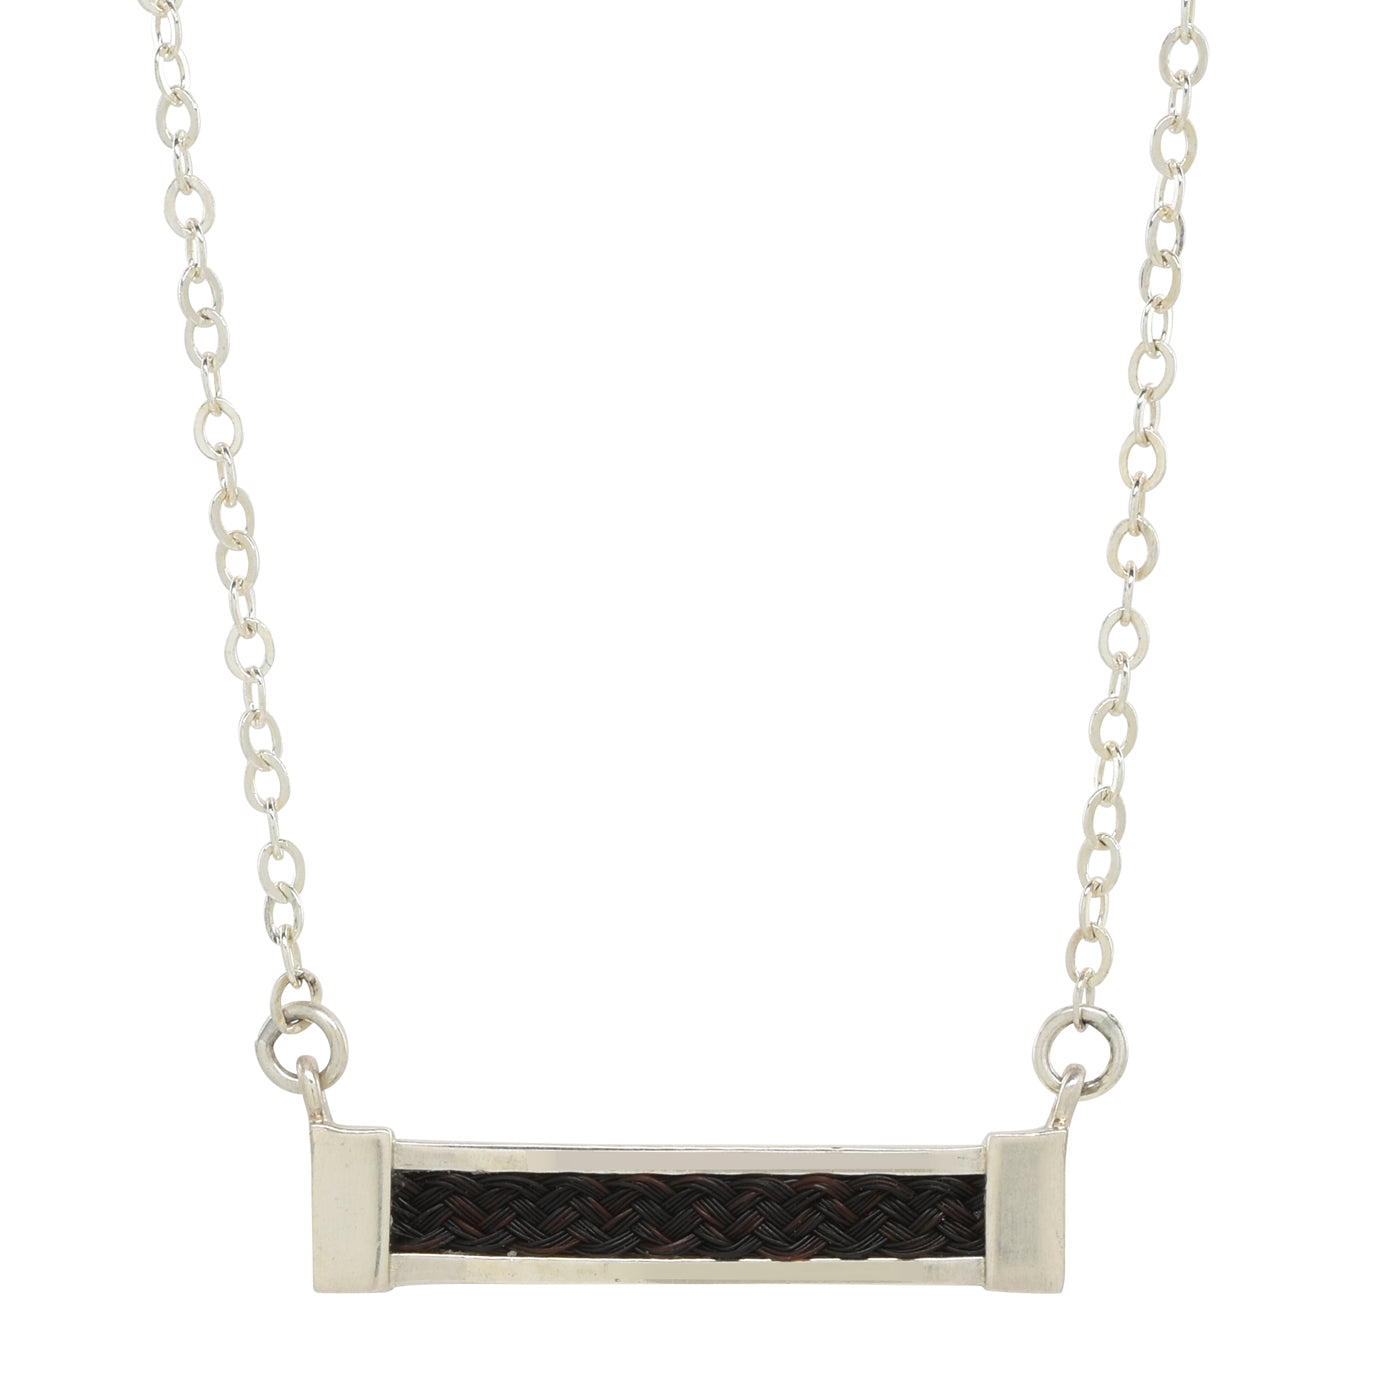 small horizontal bar necklace with inset horsehair braid